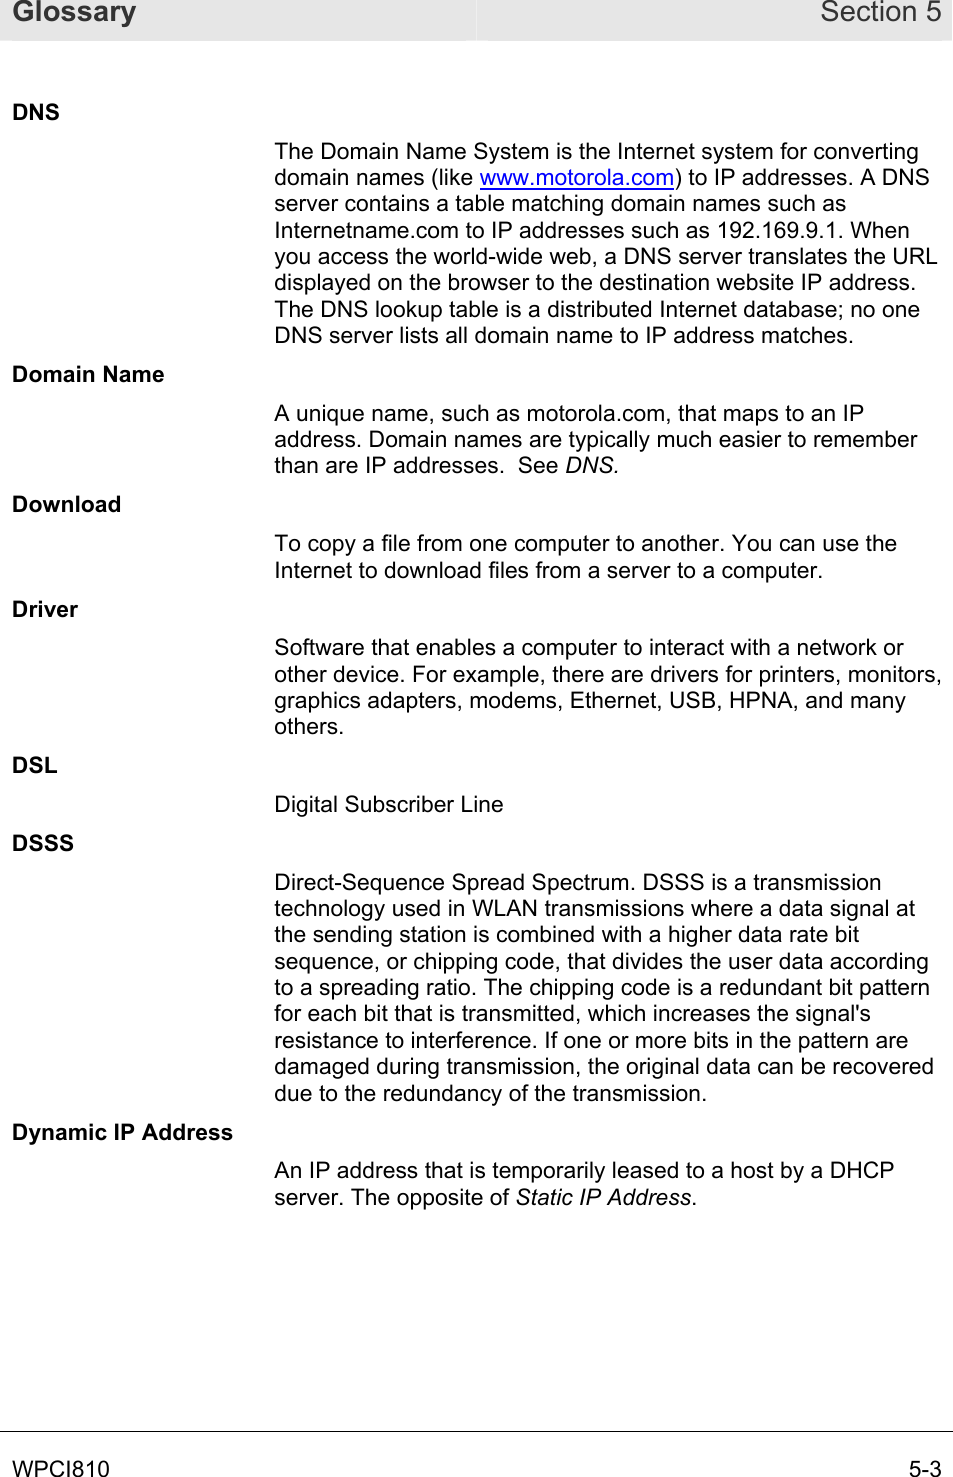 Glossary Section 5 WPCI810       5-3 DNS The Domain Name System is the Internet system for converting domain names (like www.motorola.com) to IP addresses. A DNS server contains a table matching domain names such as Internetname.com to IP addresses such as 192.169.9.1. When you access the world-wide web, a DNS server translates the URL displayed on the browser to the destination website IP address. The DNS lookup table is a distributed Internet database; no one DNS server lists all domain name to IP address matches. Domain Name A unique name, such as motorola.com, that maps to an IP address. Domain names are typically much easier to remember than are IP addresses.  See DNS. Download To copy a file from one computer to another. You can use the Internet to download files from a server to a computer.  Driver Software that enables a computer to interact with a network or other device. For example, there are drivers for printers, monitors, graphics adapters, modems, Ethernet, USB, HPNA, and many others. DSL Digital Subscriber Line DSSS Direct-Sequence Spread Spectrum. DSSS is a transmission technology used in WLAN transmissions where a data signal at the sending station is combined with a higher data rate bit sequence, or chipping code, that divides the user data according to a spreading ratio. The chipping code is a redundant bit pattern for each bit that is transmitted, which increases the signal&apos;s resistance to interference. If one or more bits in the pattern are damaged during transmission, the original data can be recovered due to the redundancy of the transmission.  Dynamic IP Address An IP address that is temporarily leased to a host by a DHCP server. The opposite of Static IP Address. 